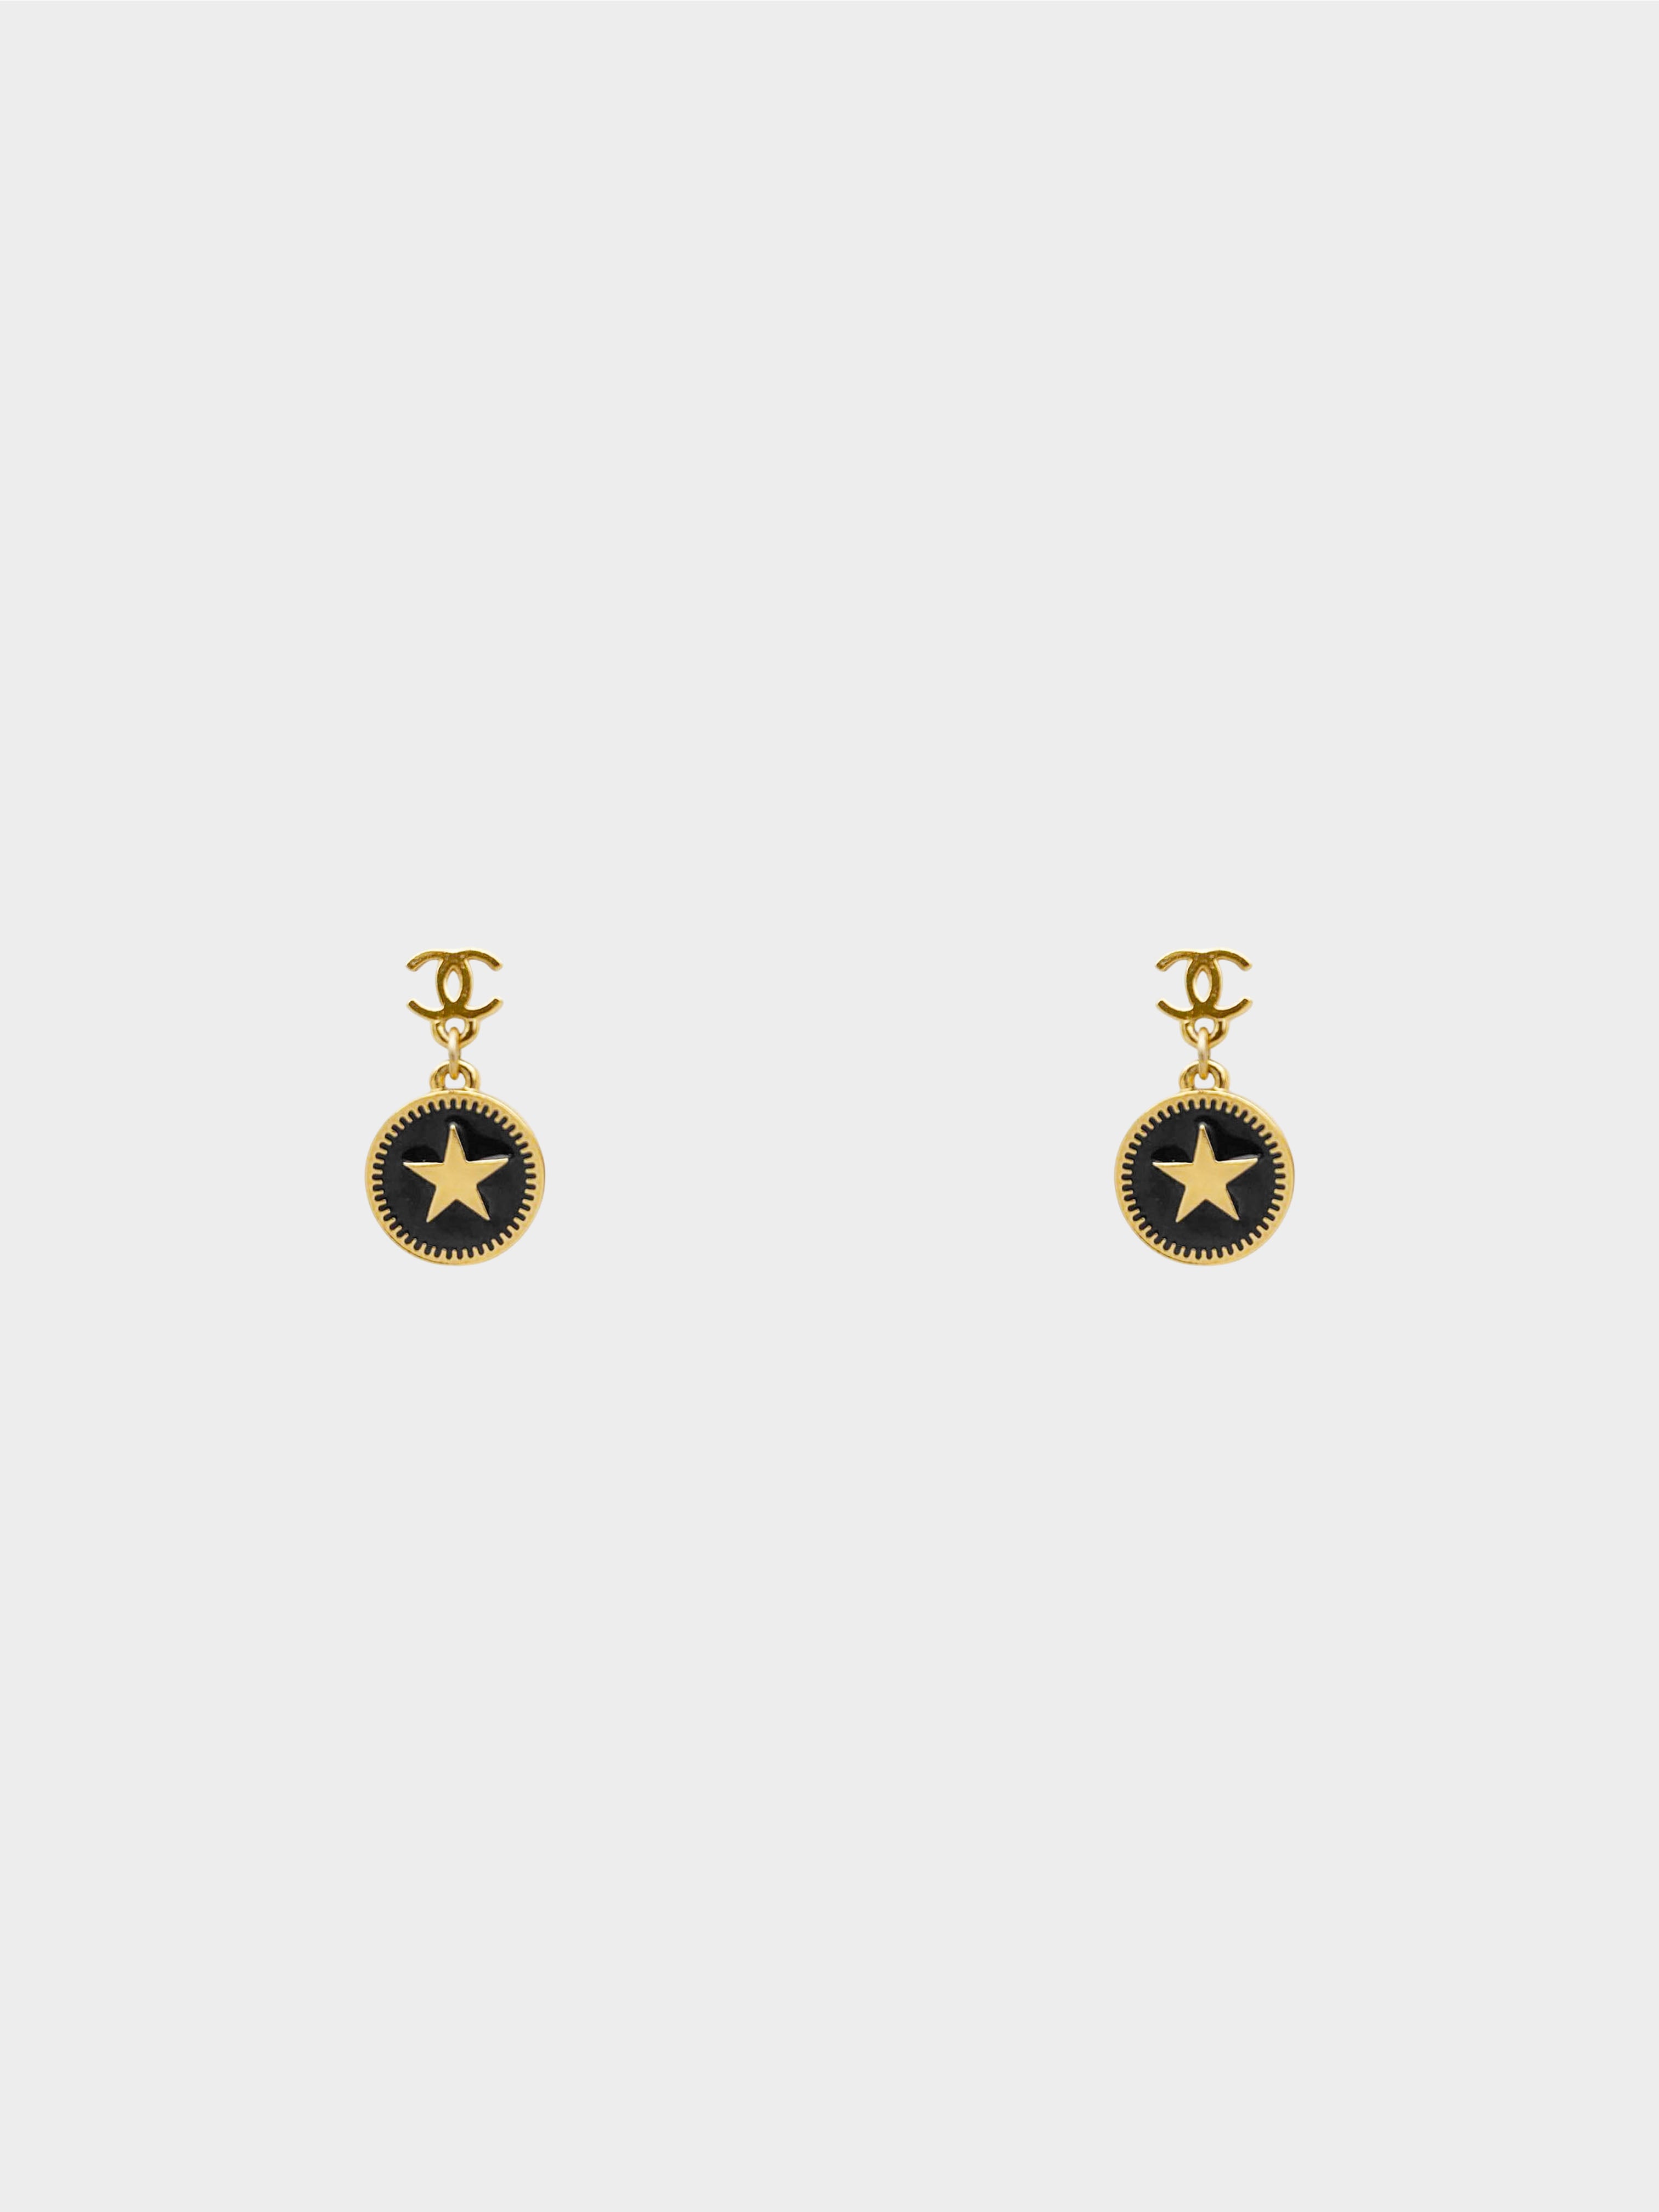 Chanel Spring 2001 Gold and Black CC Logo and Star Swing Earrings